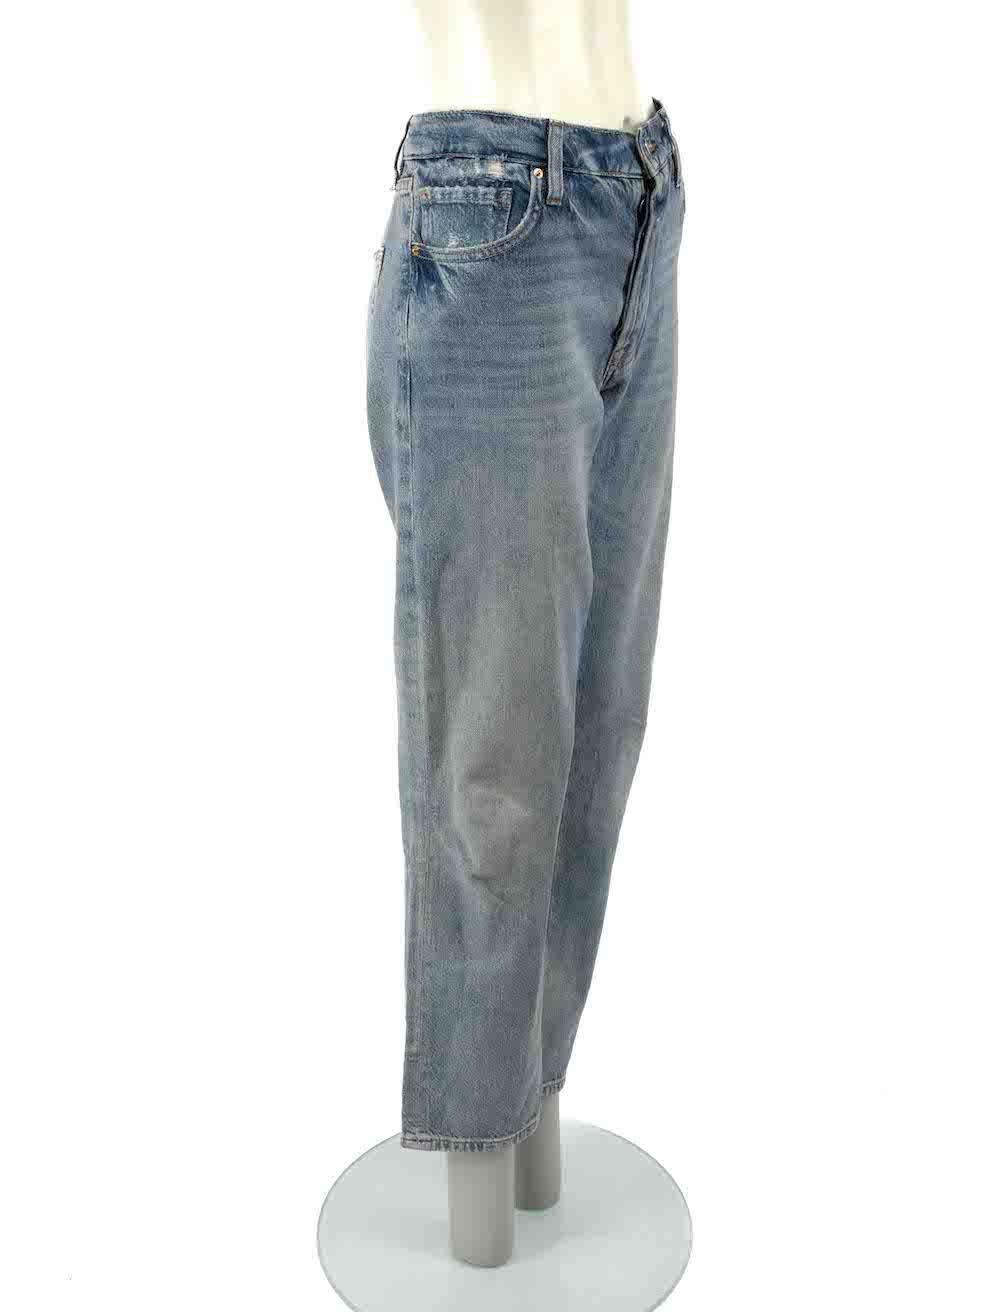 CONDITION is Very good. Hardly any visible wear to jeans is evident on this used FRAME designer resale item. Please note that these jeans are deliberately distressed.
 
Details
Le Slouch
Blue
Denim
Straight leg trousers
Stonewashed and distressed